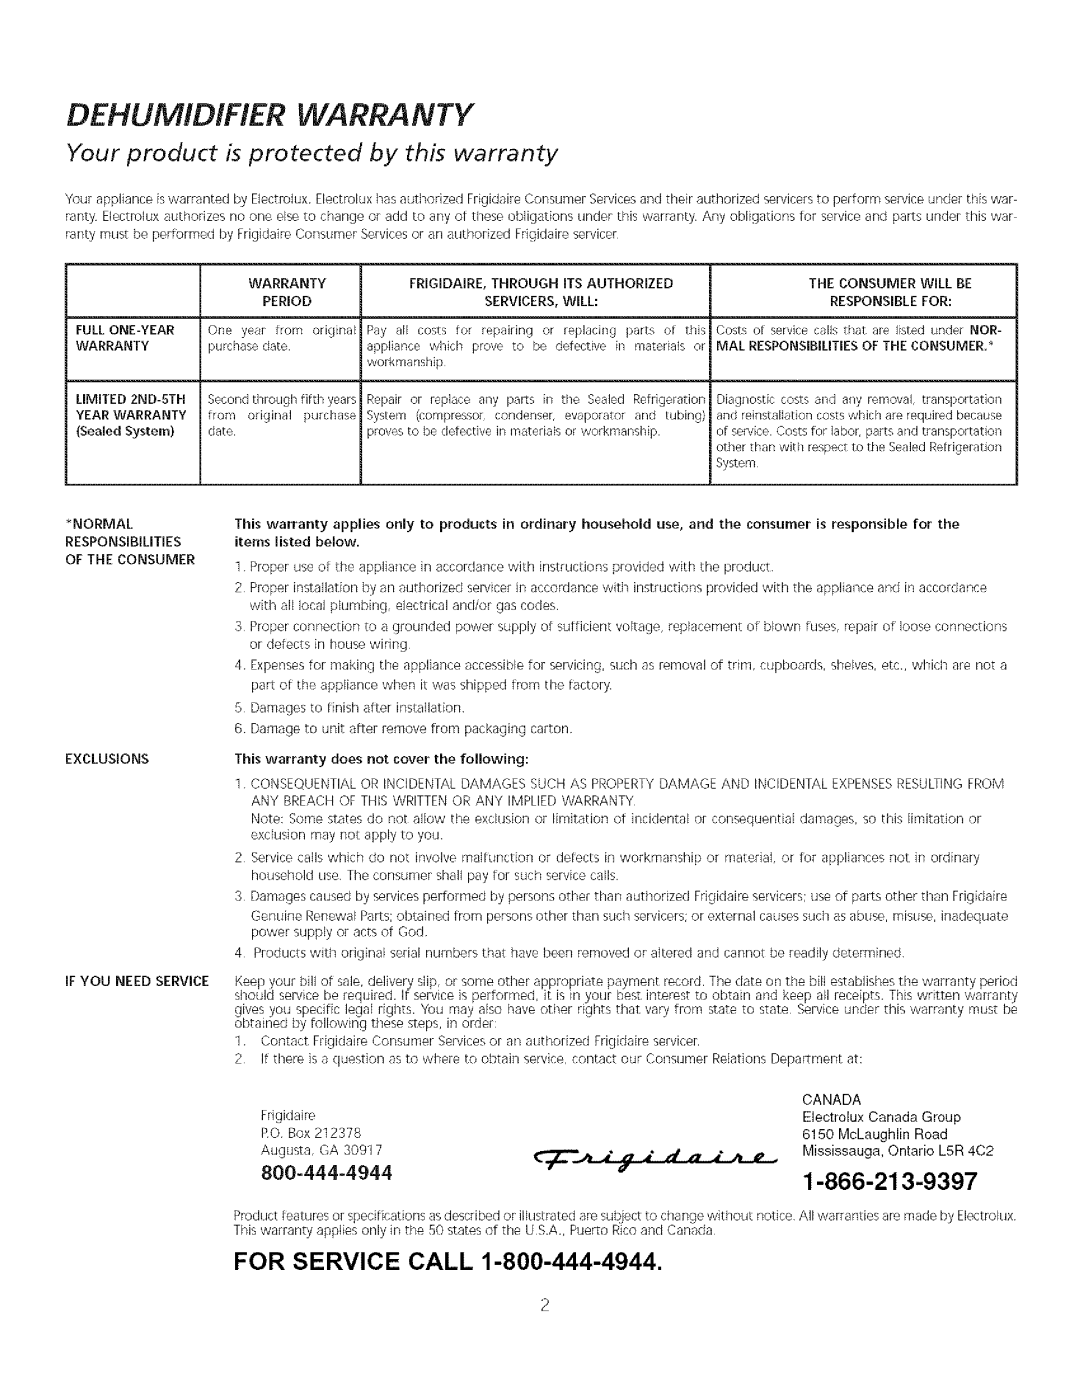 Electrolux Dehumidifier DEHUMiDiFiER WARRANTY, Your product is protected by this warranty, For Service Call 